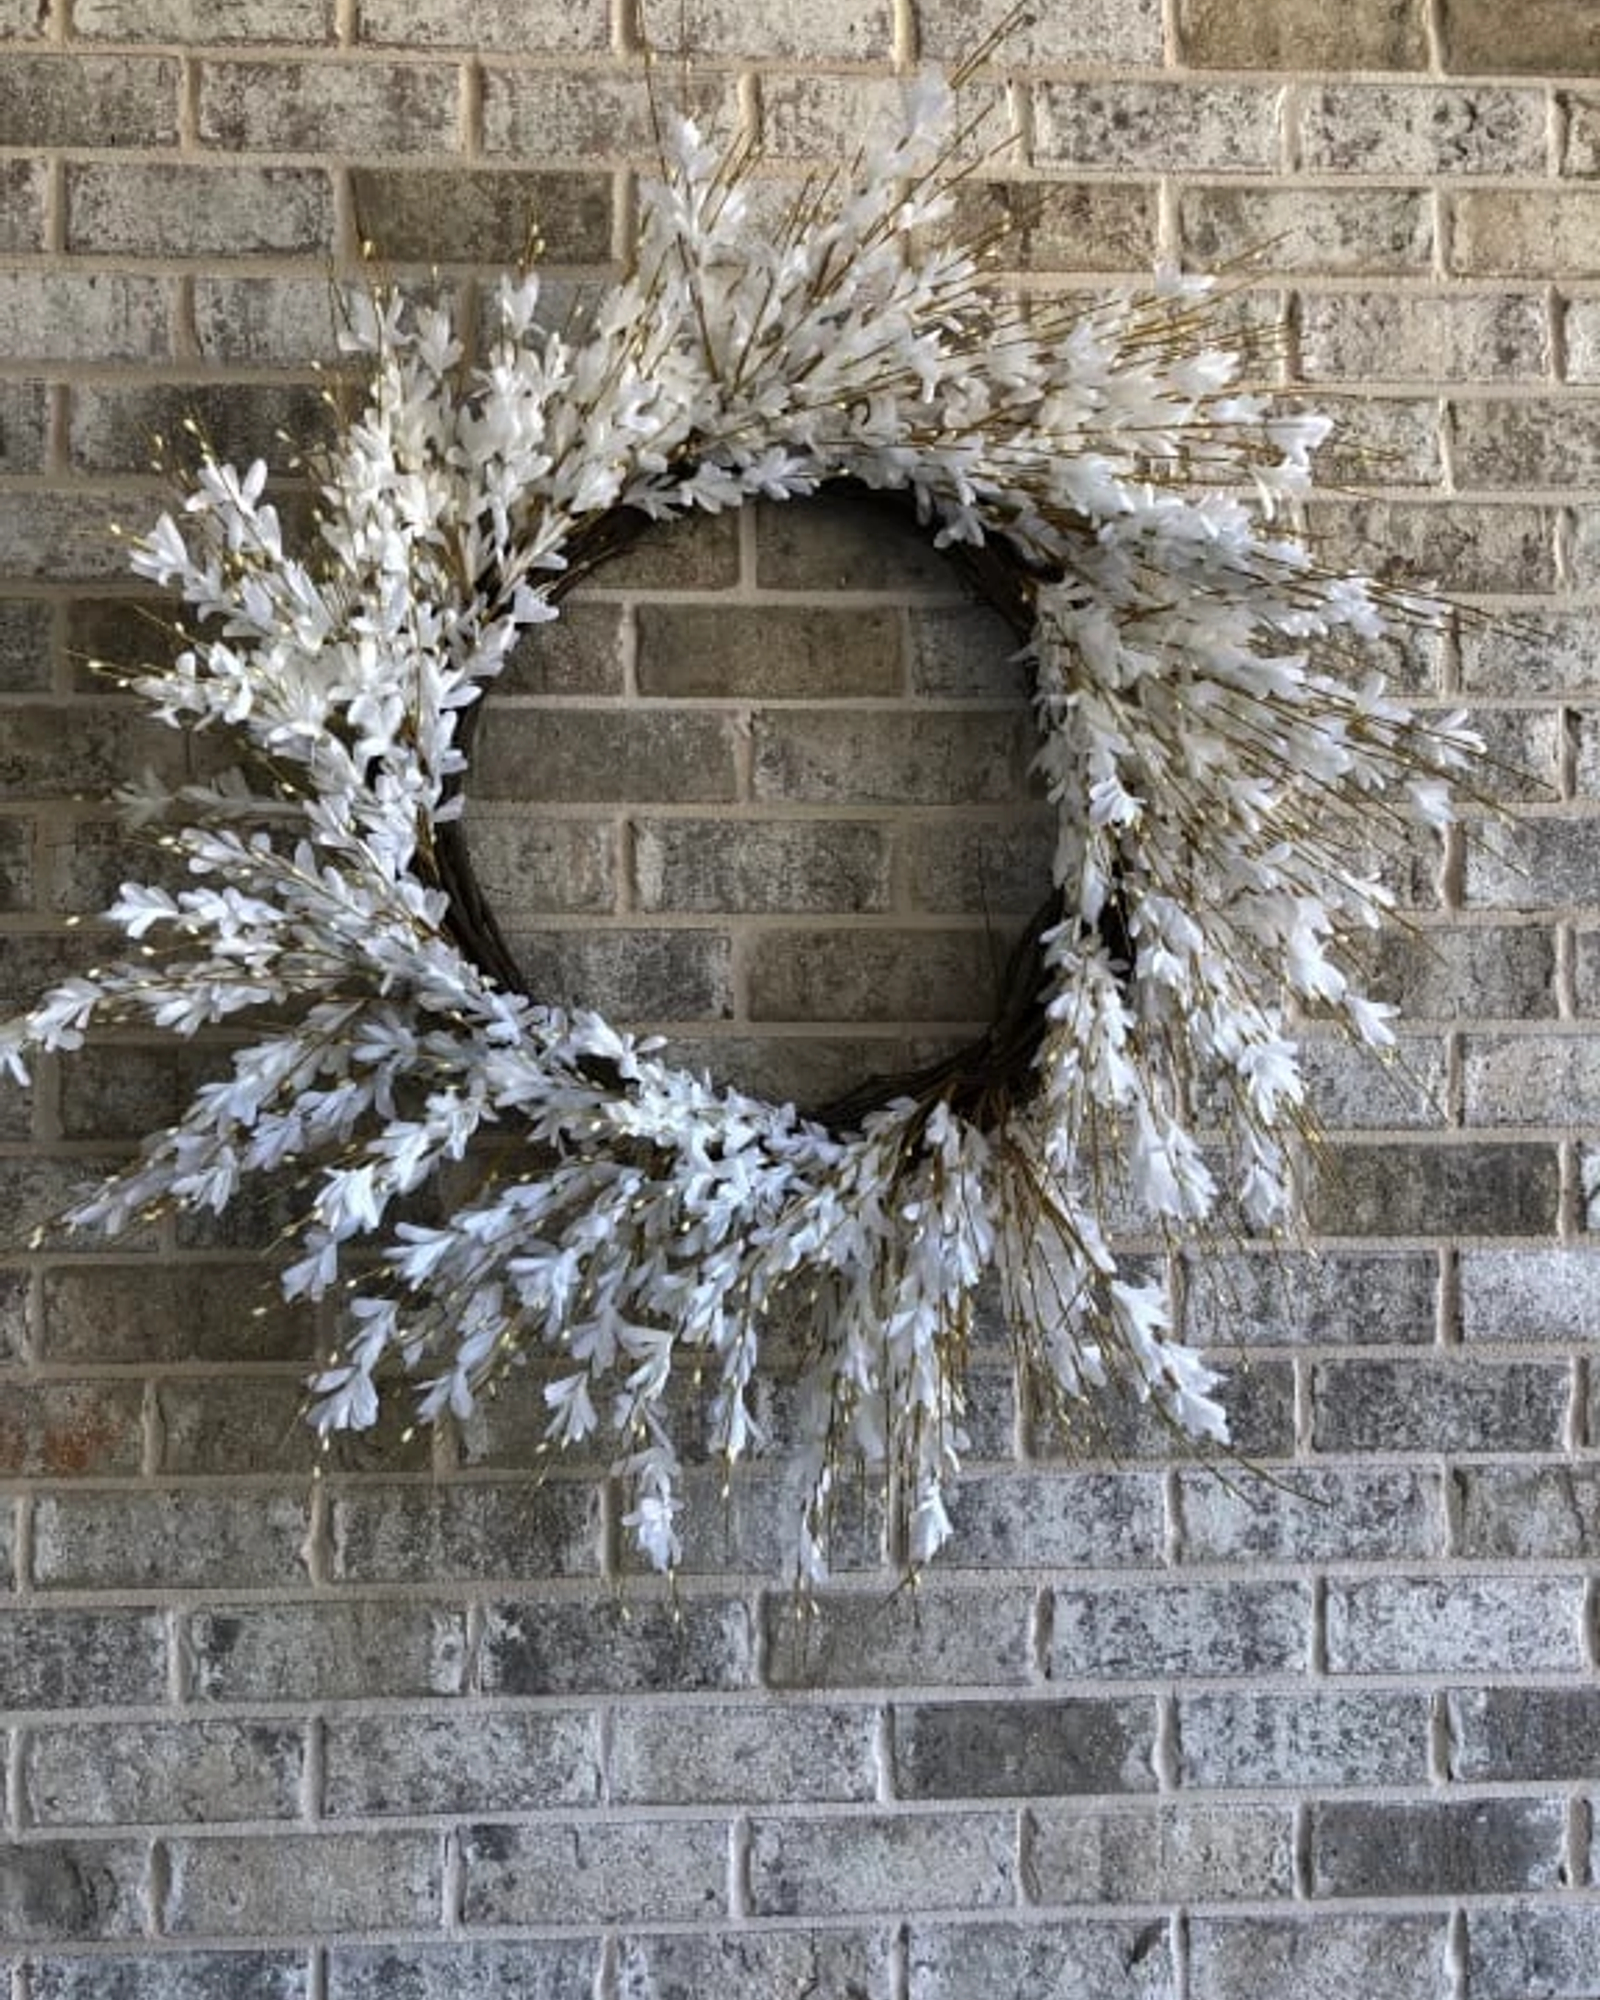 23 White Forsythia Wreath by Bloom Room